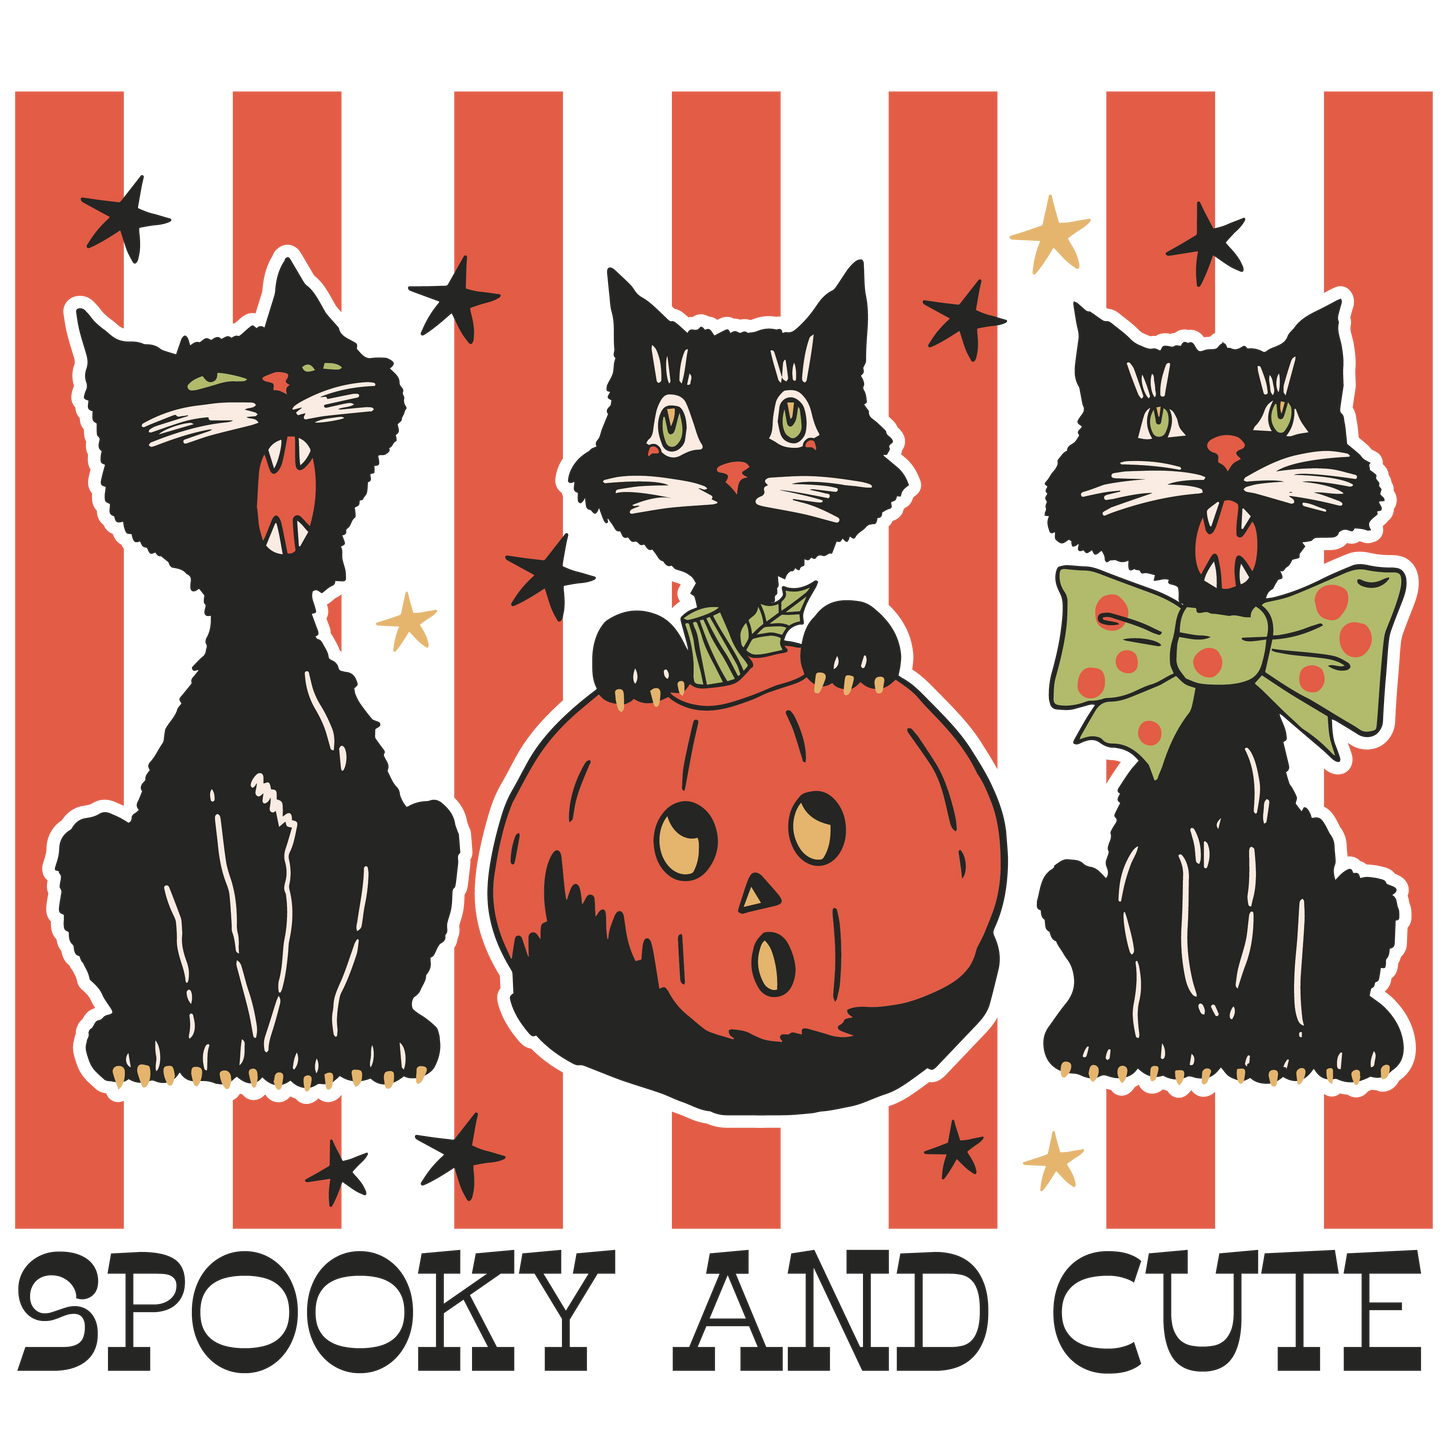 VINTAGE SPOOKY AND CUTE